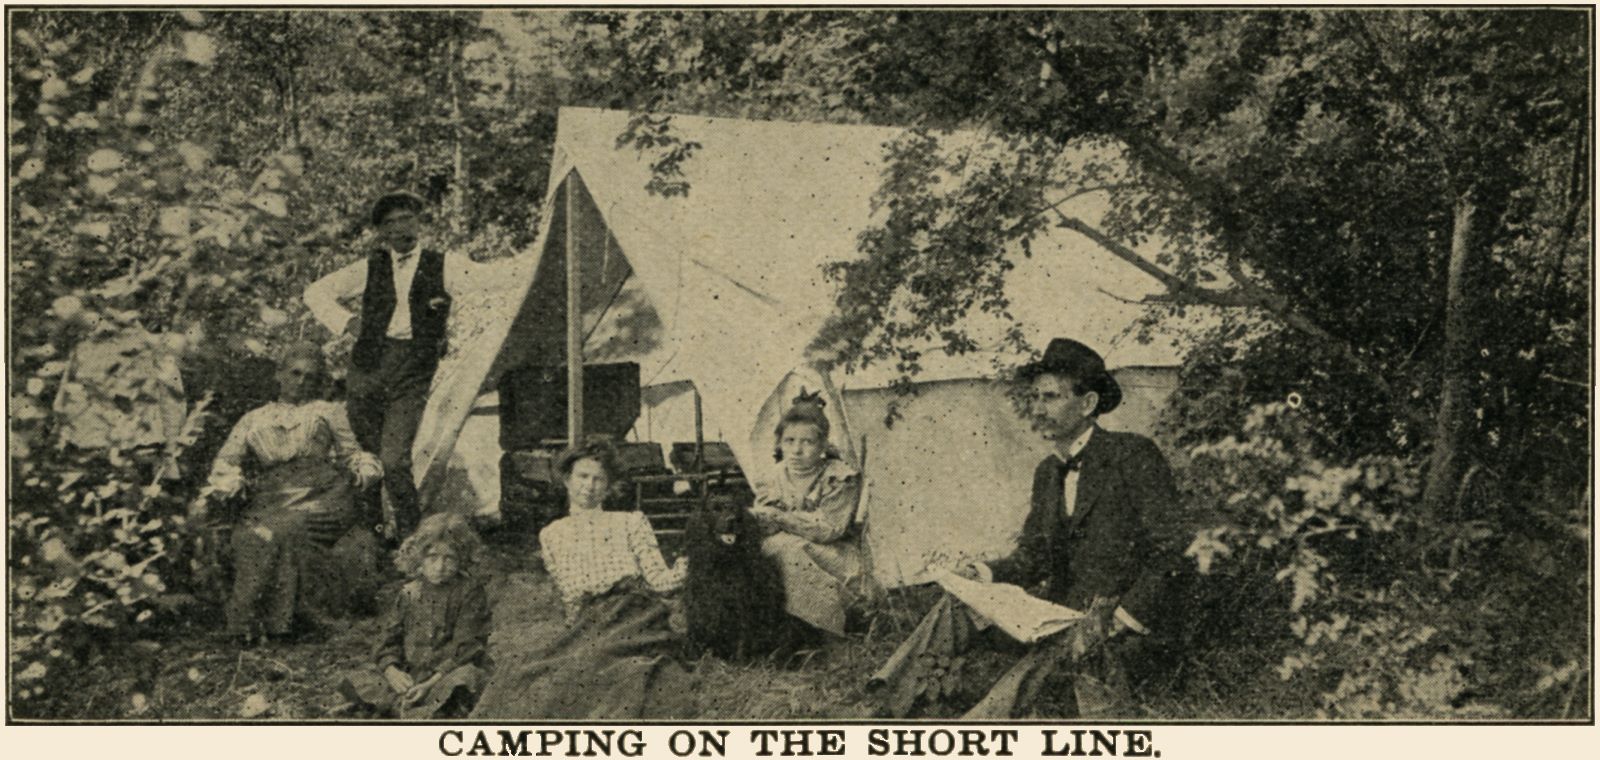 Camping on the Short Line.